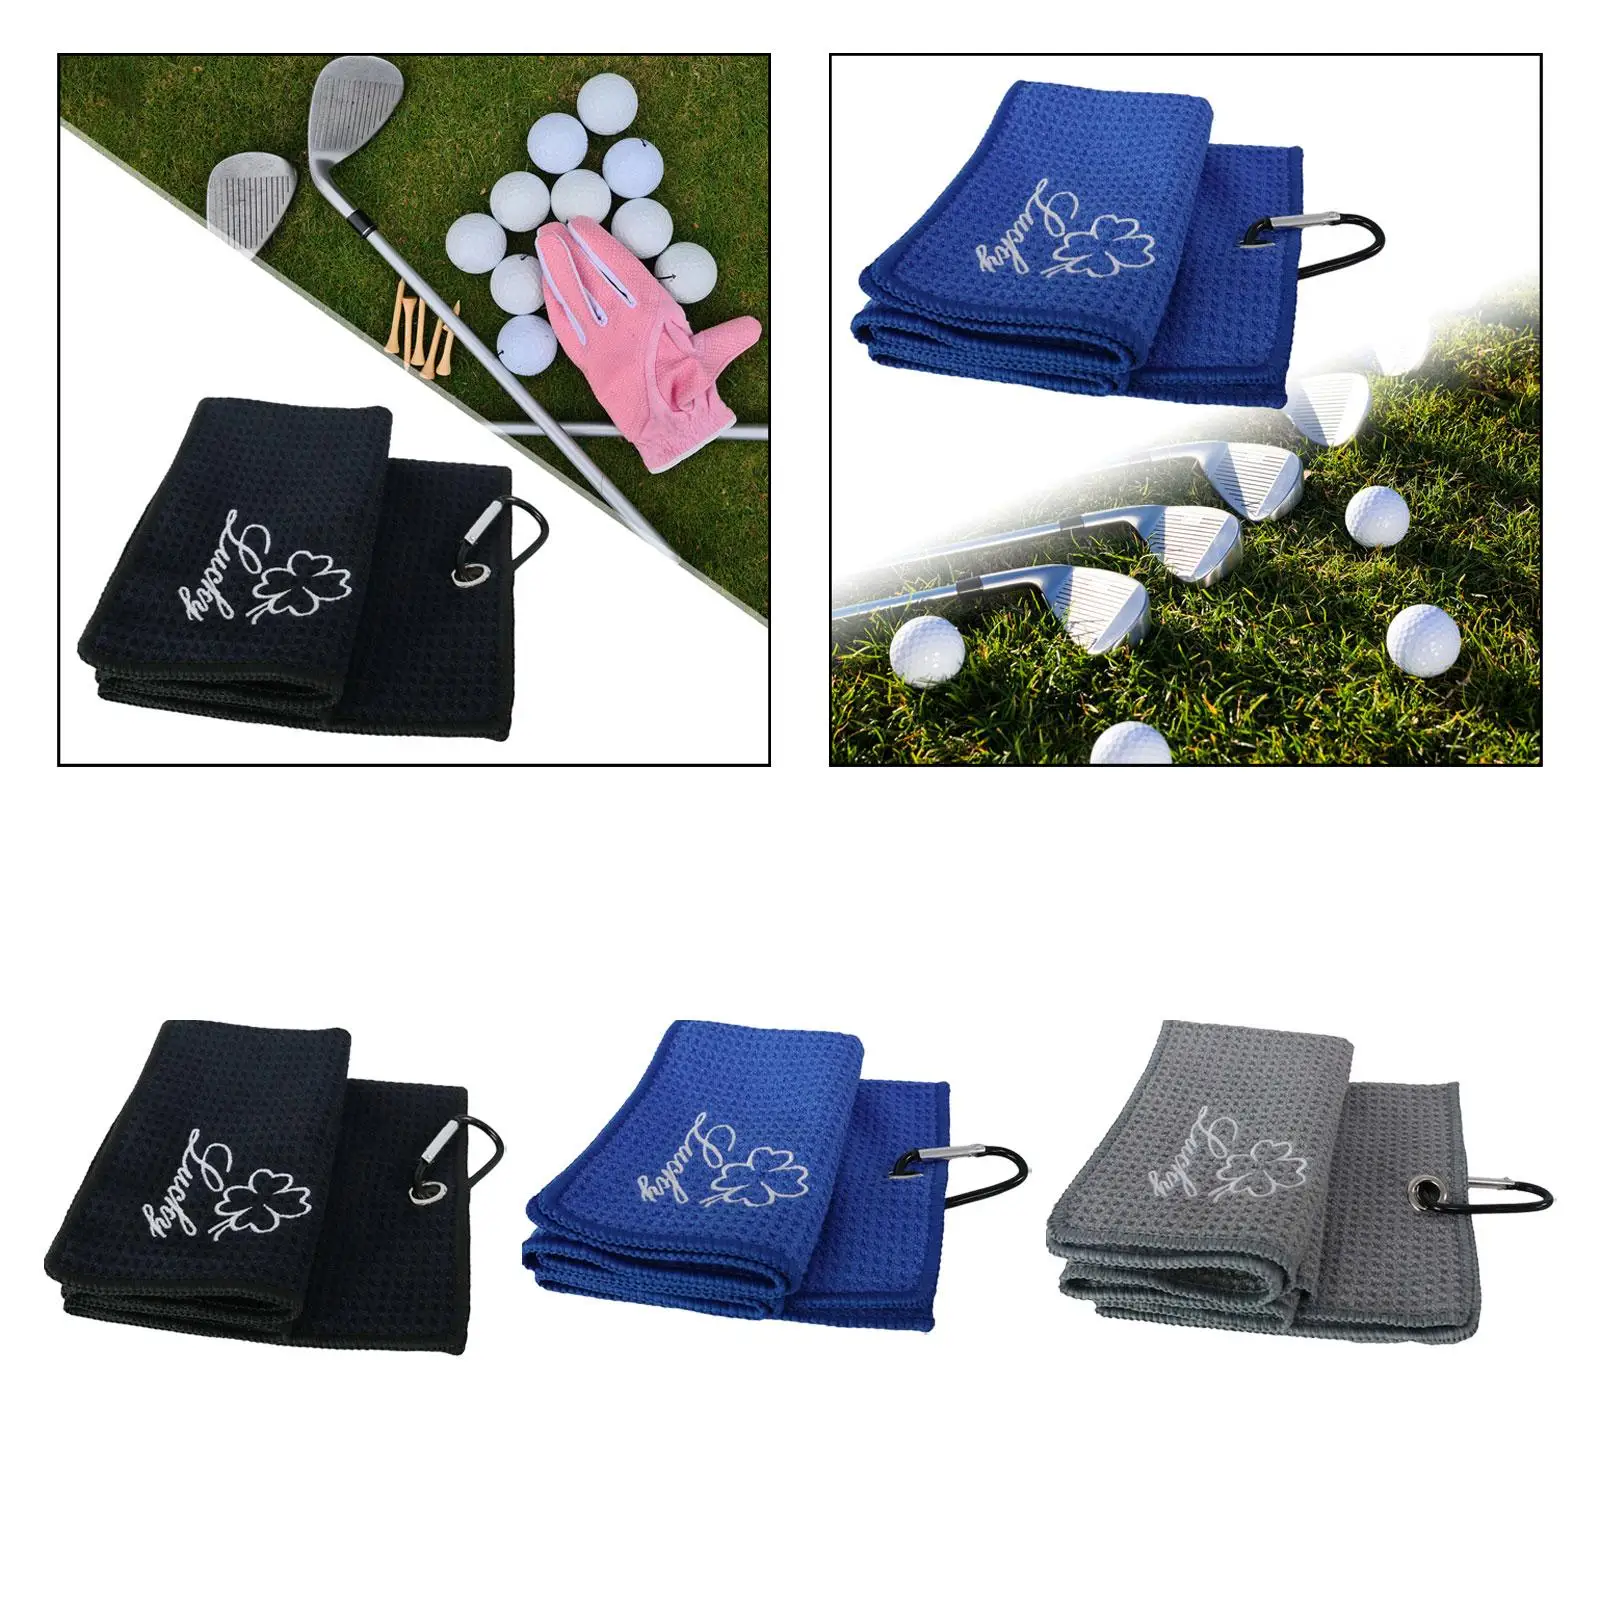 Golf Towel for Golf Bags Golf Club Cleaning Towel Lightweight Breathable with